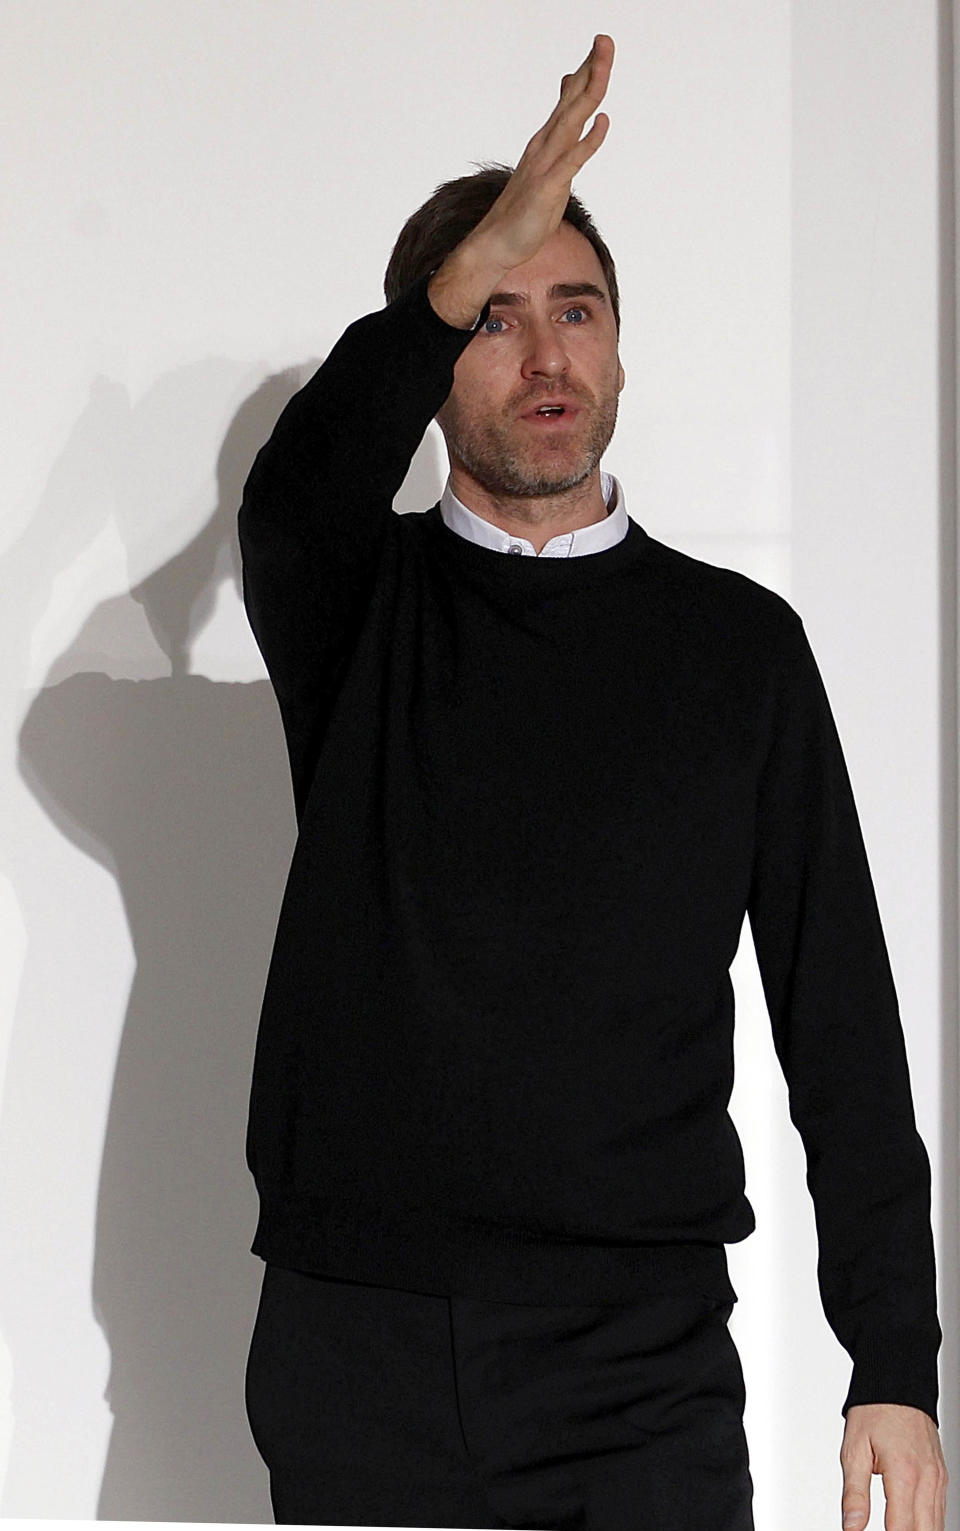 FILE - Belgian designer Raf Simons acknowledges the applause of the audience at the end of the Jil Sander Spring/Summer 2012 women's collection in Milan, in this Saturday, Sept. 25, 2011 file photo. Christian Dior on Monday April 9 2012 named Belgian designer Simons as its new artistic director, and says he'll present his first show for the renowned fashion house in Paris in July. The appointment comes seven months after star designer John Galliano was convicted by a Paris court for making anti-Semitic insults. (AP Photo/Giuseppe Aresu, file)